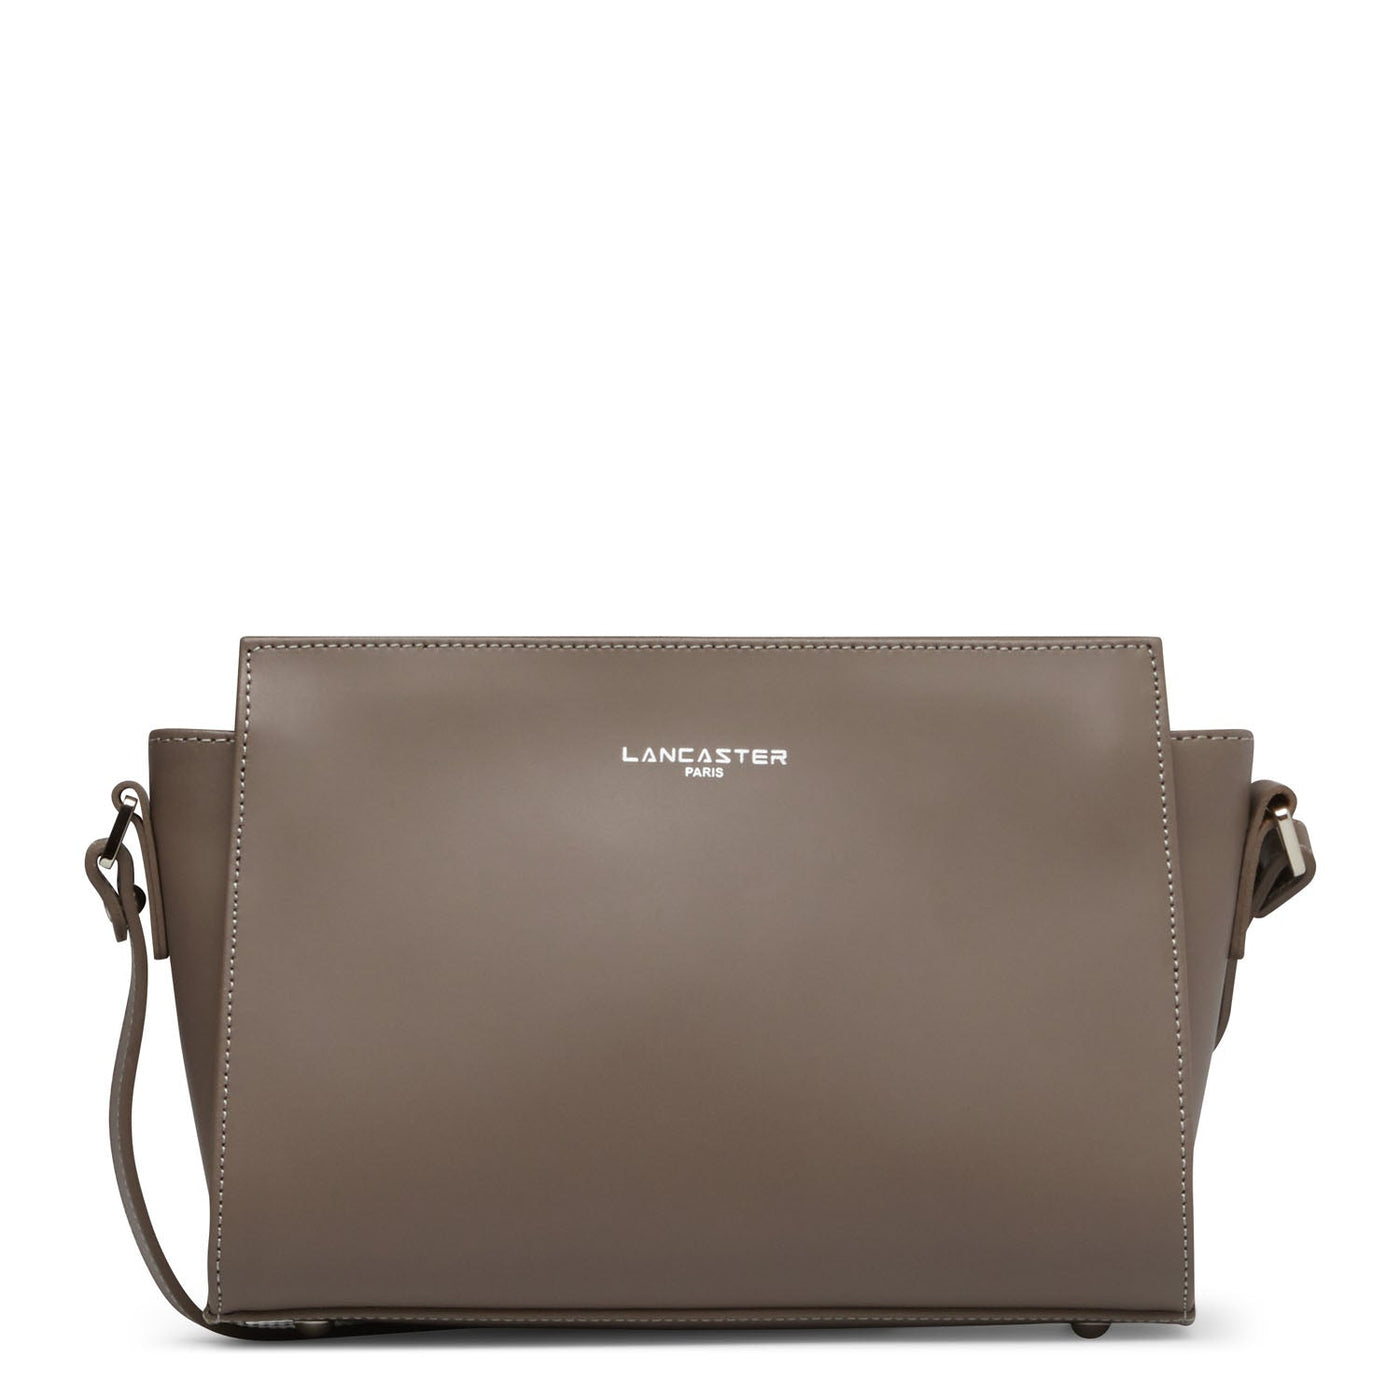 crossbody bag - smooth #couleur_taupe